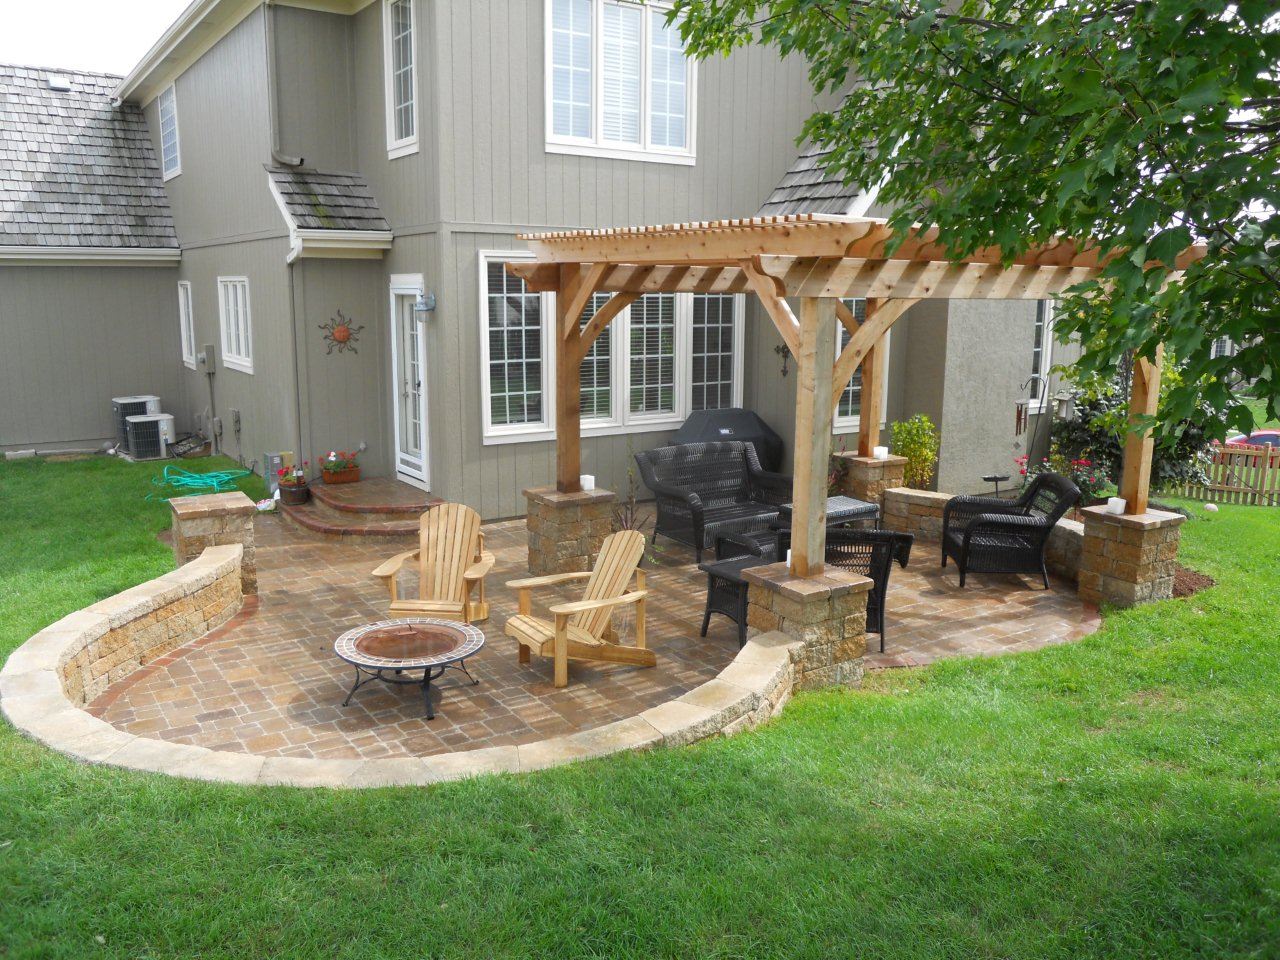 small backyard pergola ideas ztil news in with 10 awesome ideas how to build backyard pergola ideas from Simphome.com